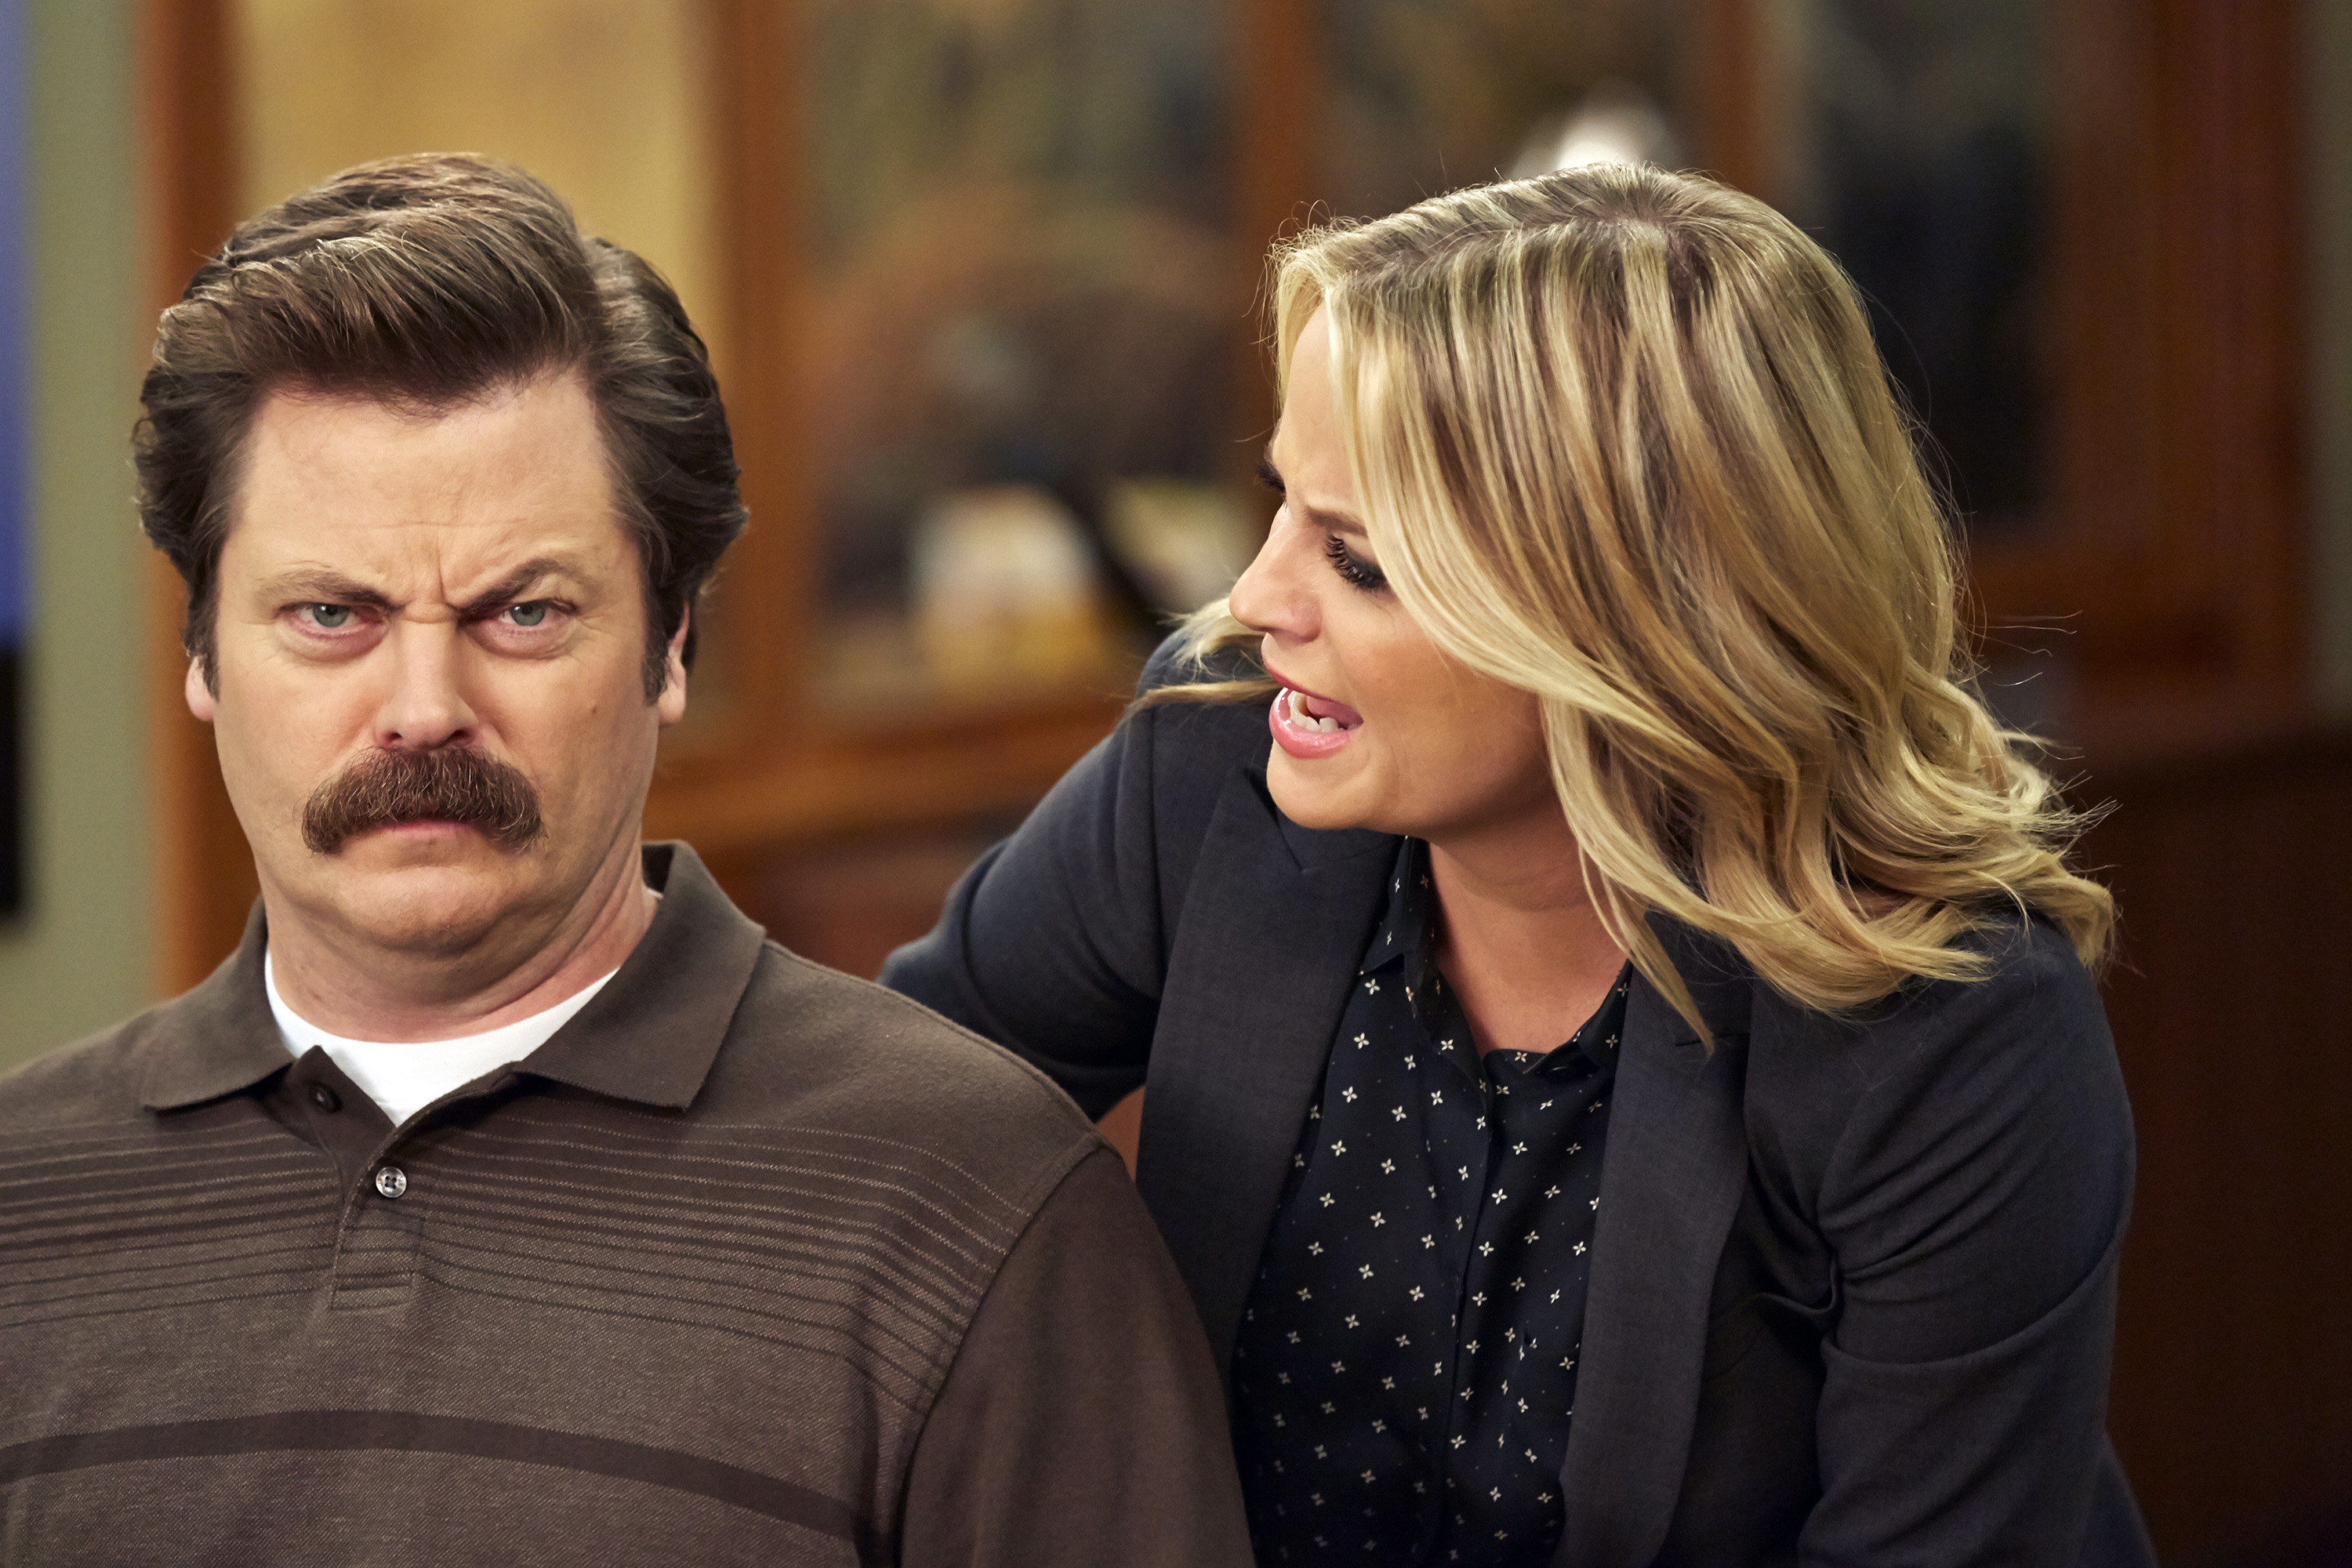 QUIZ: Are You a Ron Swanson Expert?